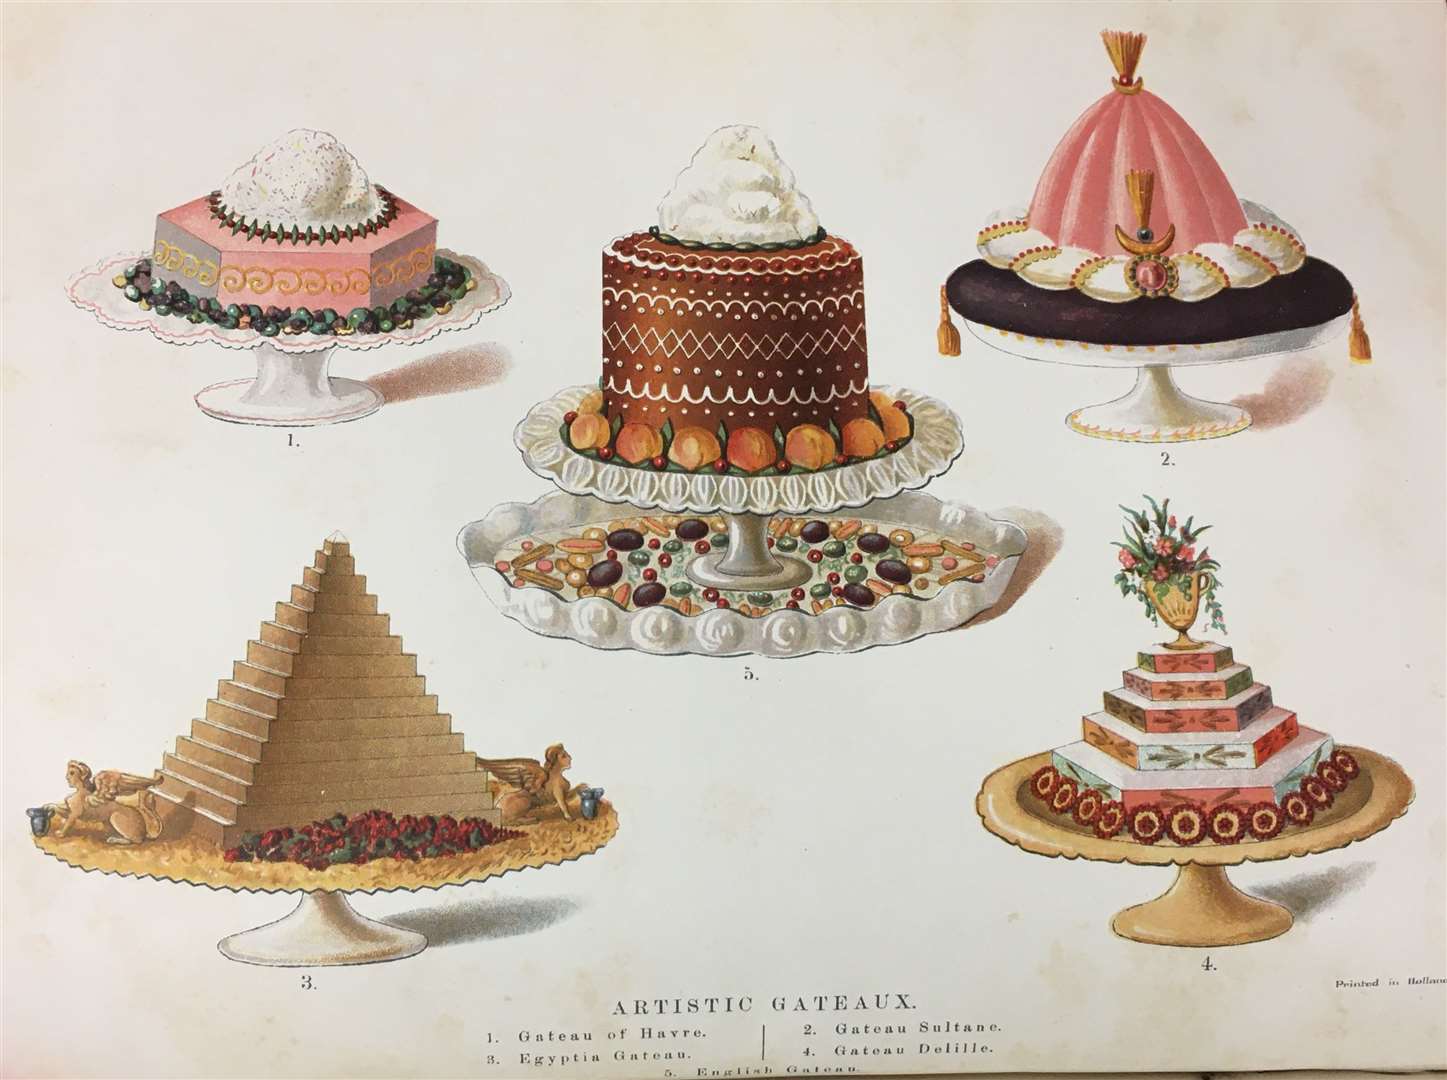 Artistic Gateaux from the Encyclopedia of Cookies, 1893.